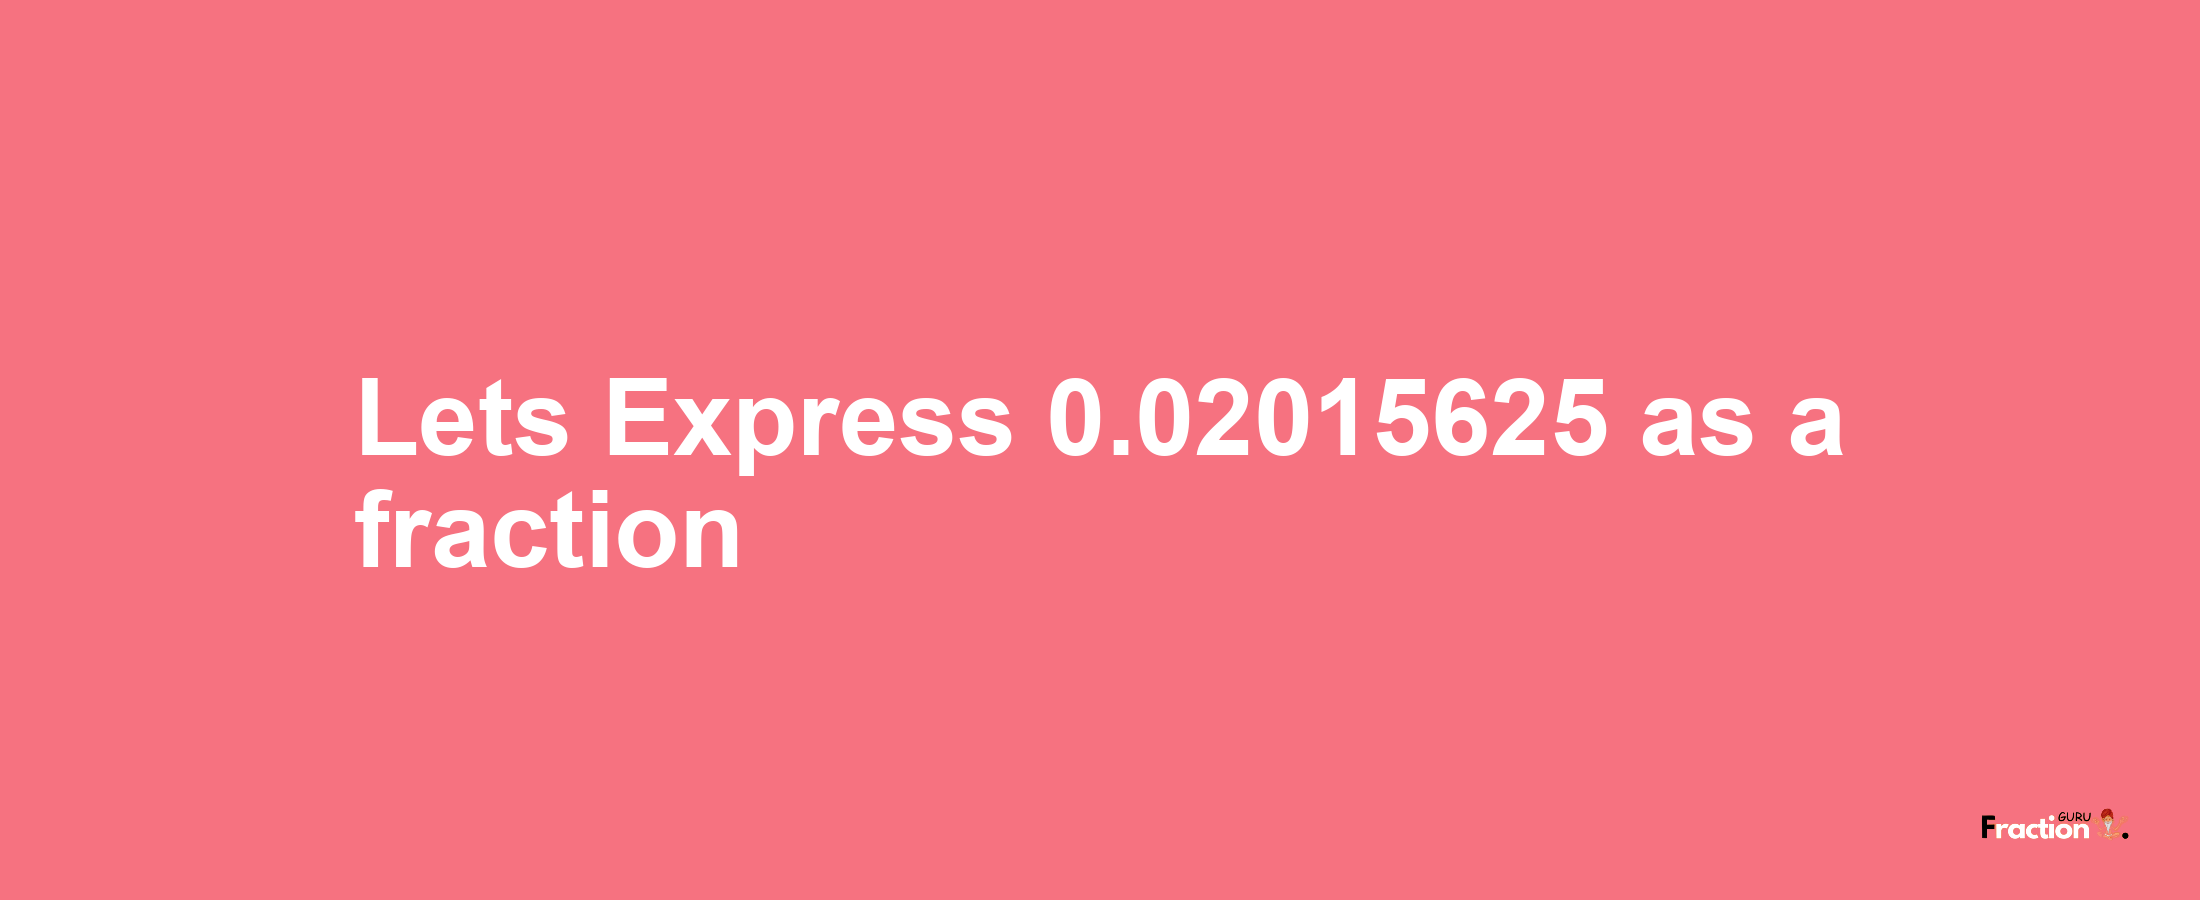 Lets Express 0.02015625 as afraction